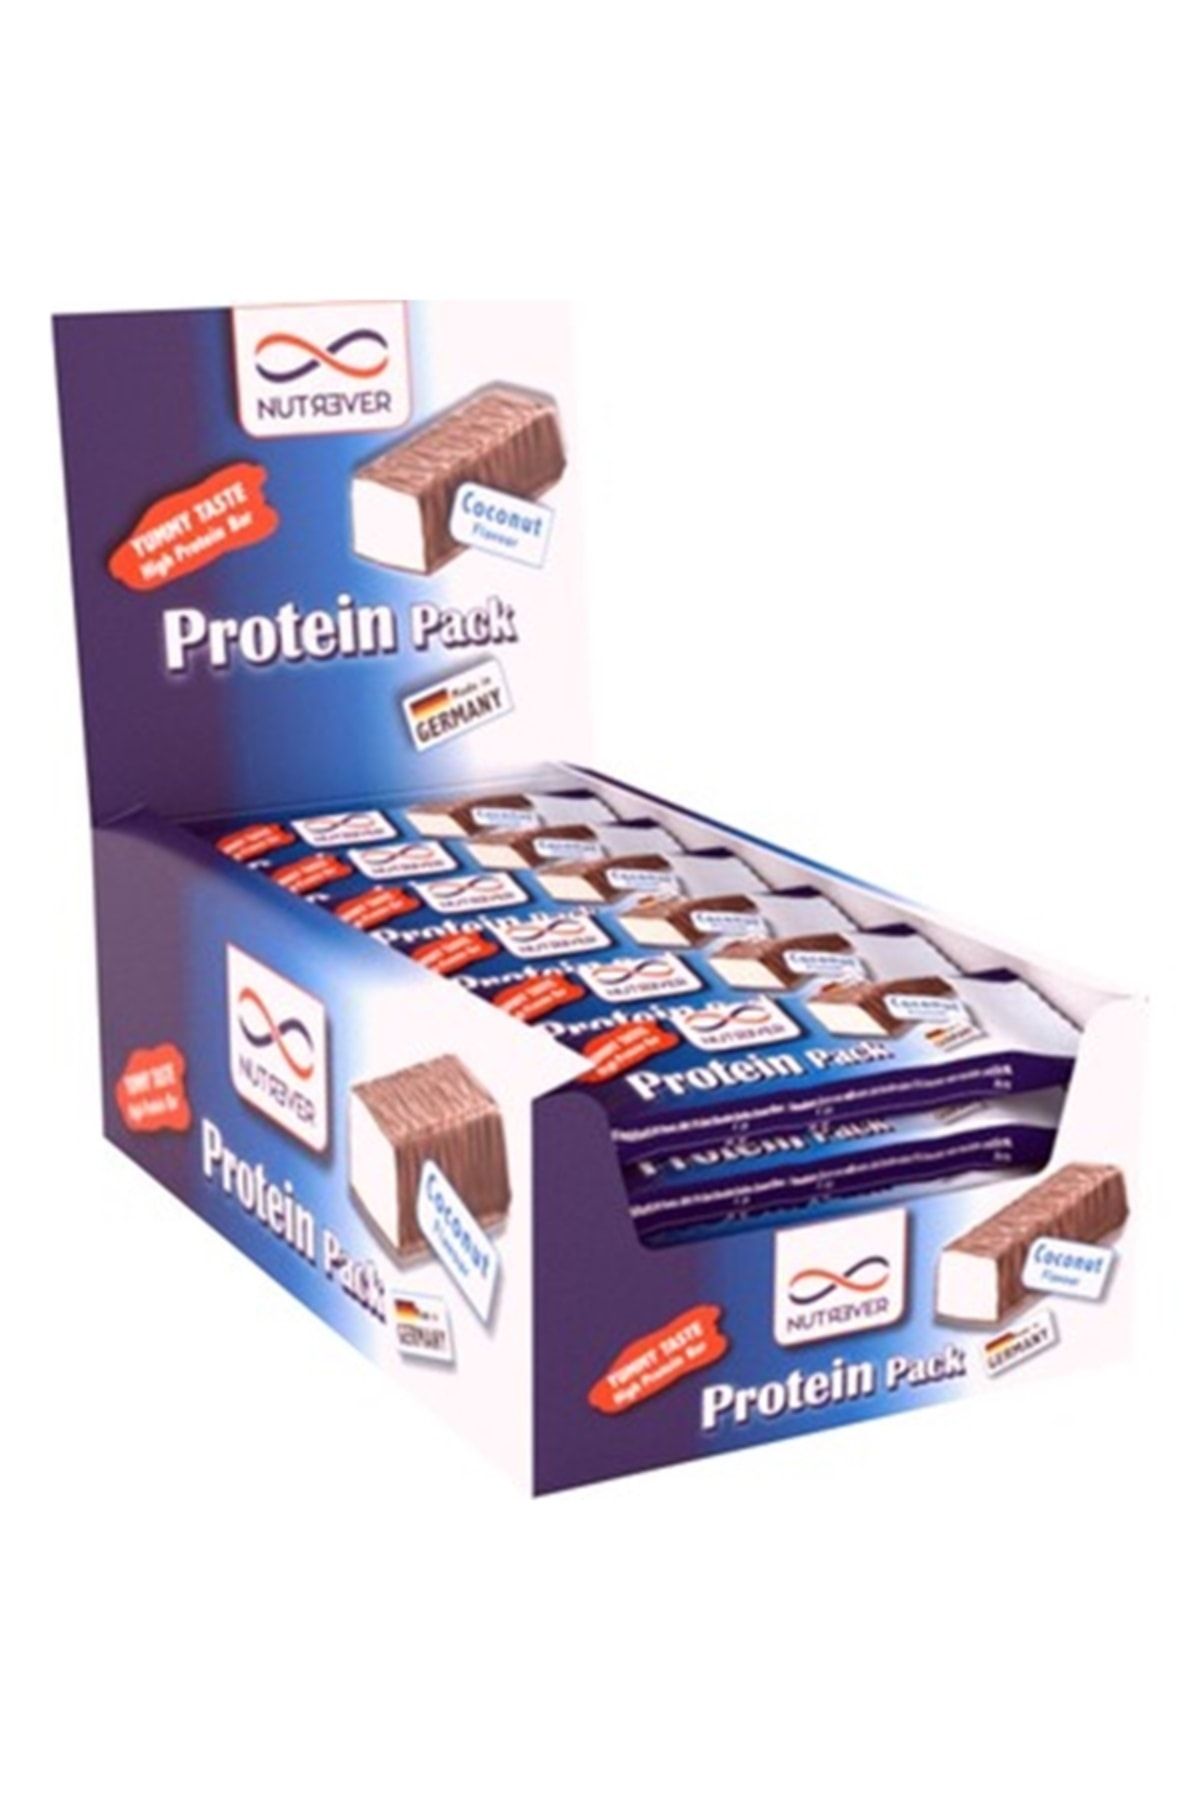 Nutrever Protein Pack 60 G 24 Adet -hindistan Cevizi 4260399645831